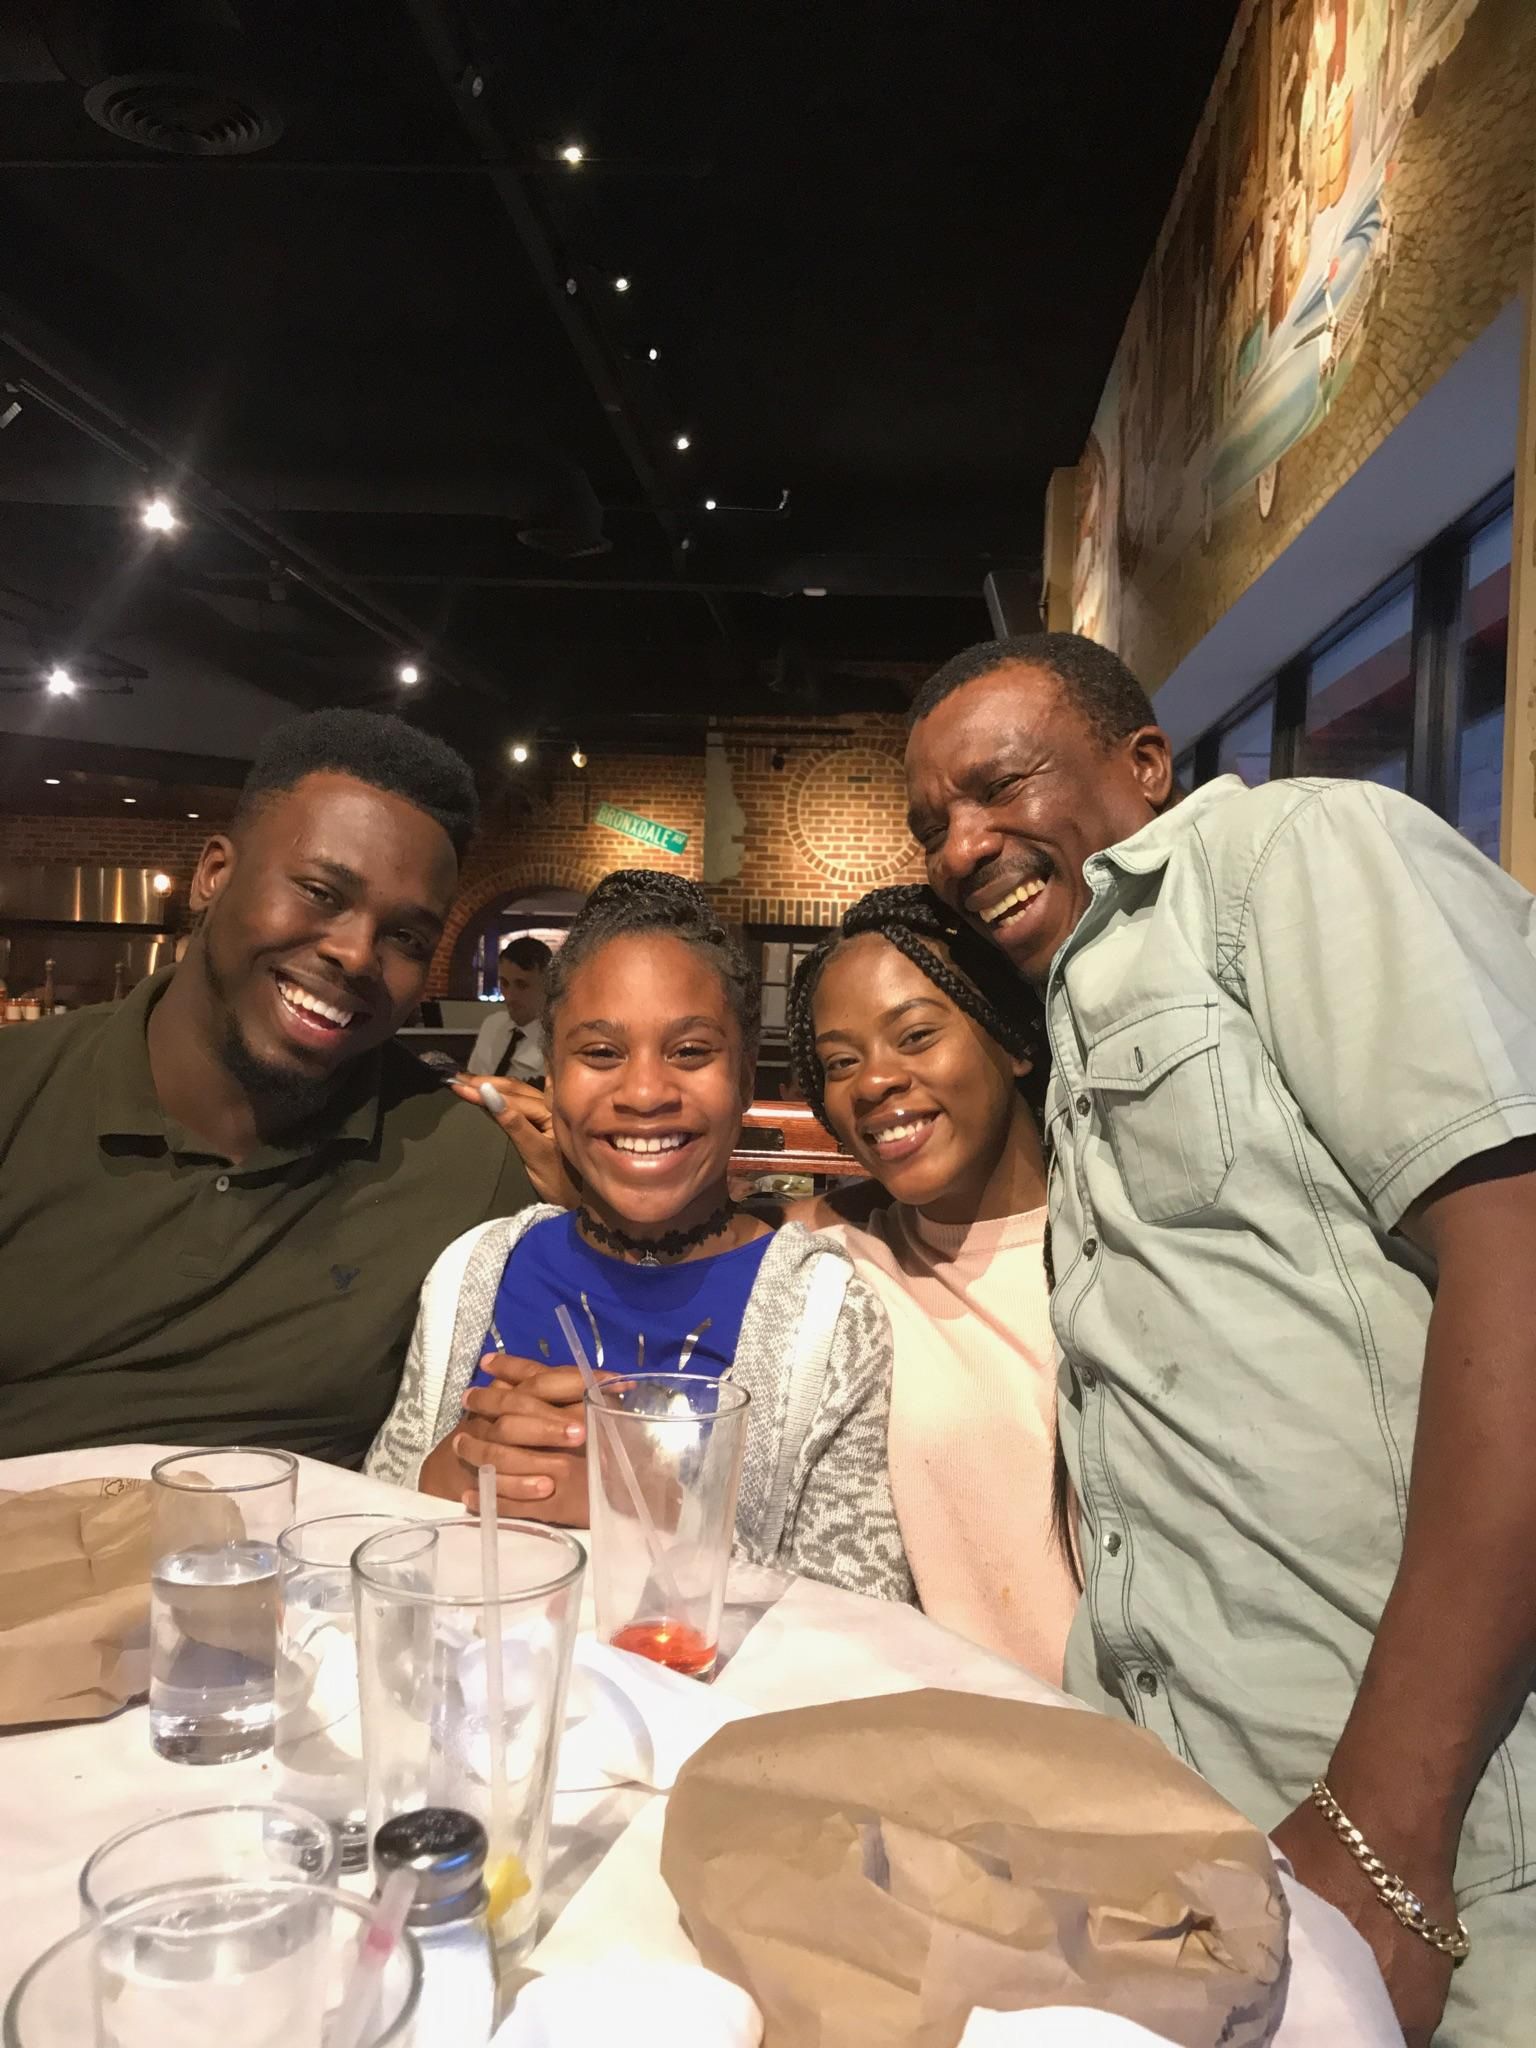 Errol Wray Jr. (left) with his two younger sisters and his dad Errol Wray Sr. during a family night out in New York City. Courtesy Errol Wray Jr.